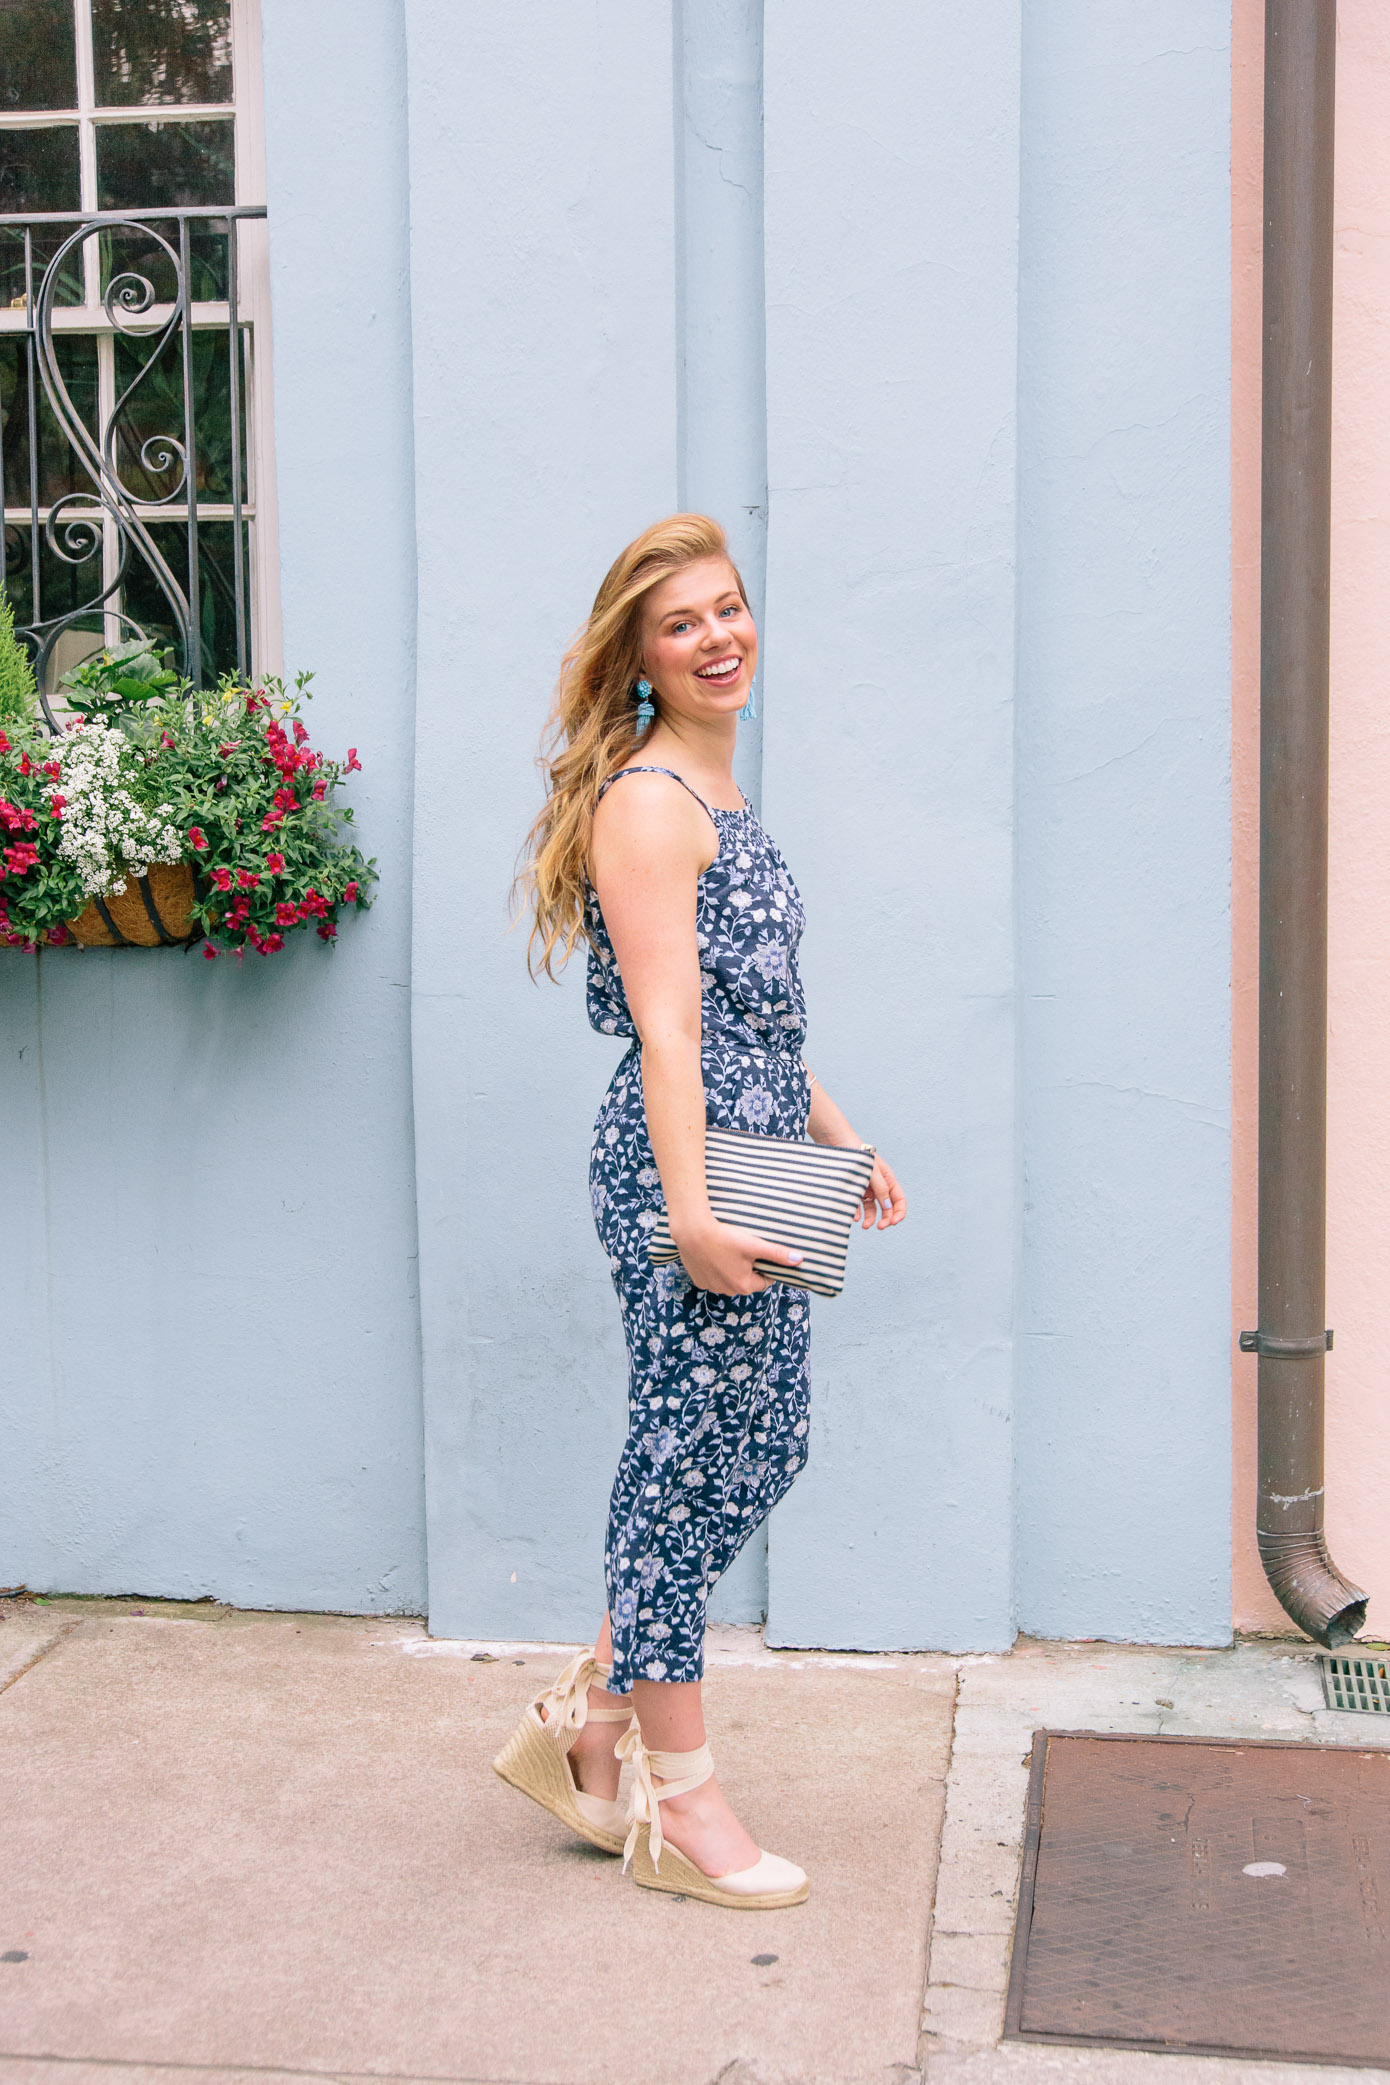 Comfy Navy Floral Jumpsuit for Summer | Jumpsuit under $50 | Louella Reese Life & Style Blog